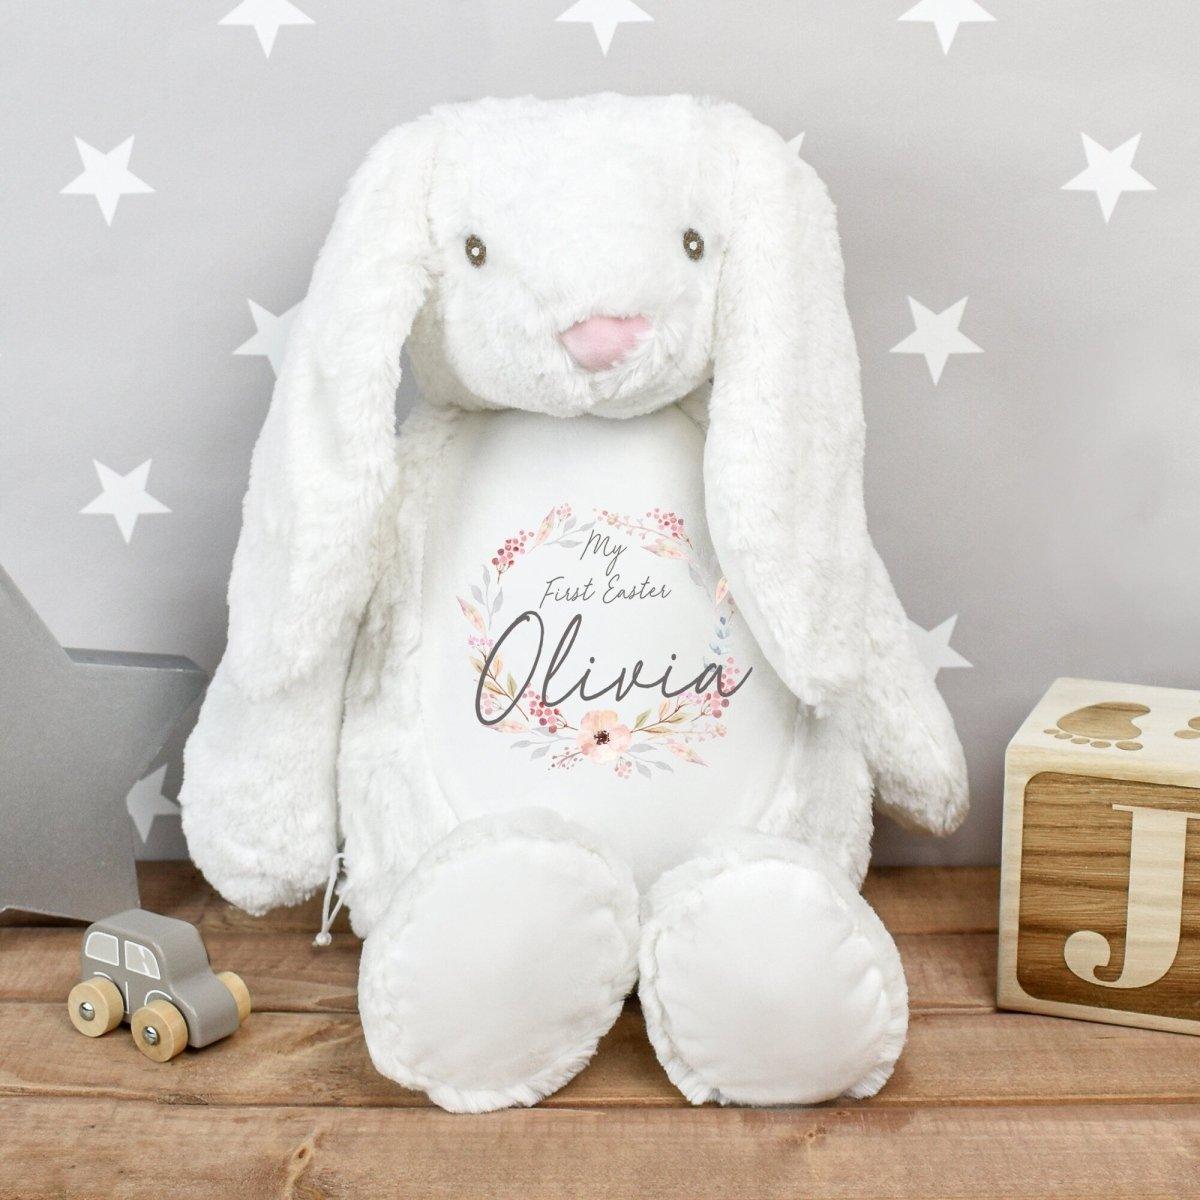 Personalised My First Easter Teddy, First Easter Bunny, 1st Easter Gift, New Baby Easter Gift, Easter Baby Gift, My First Easter - Amy Lucy